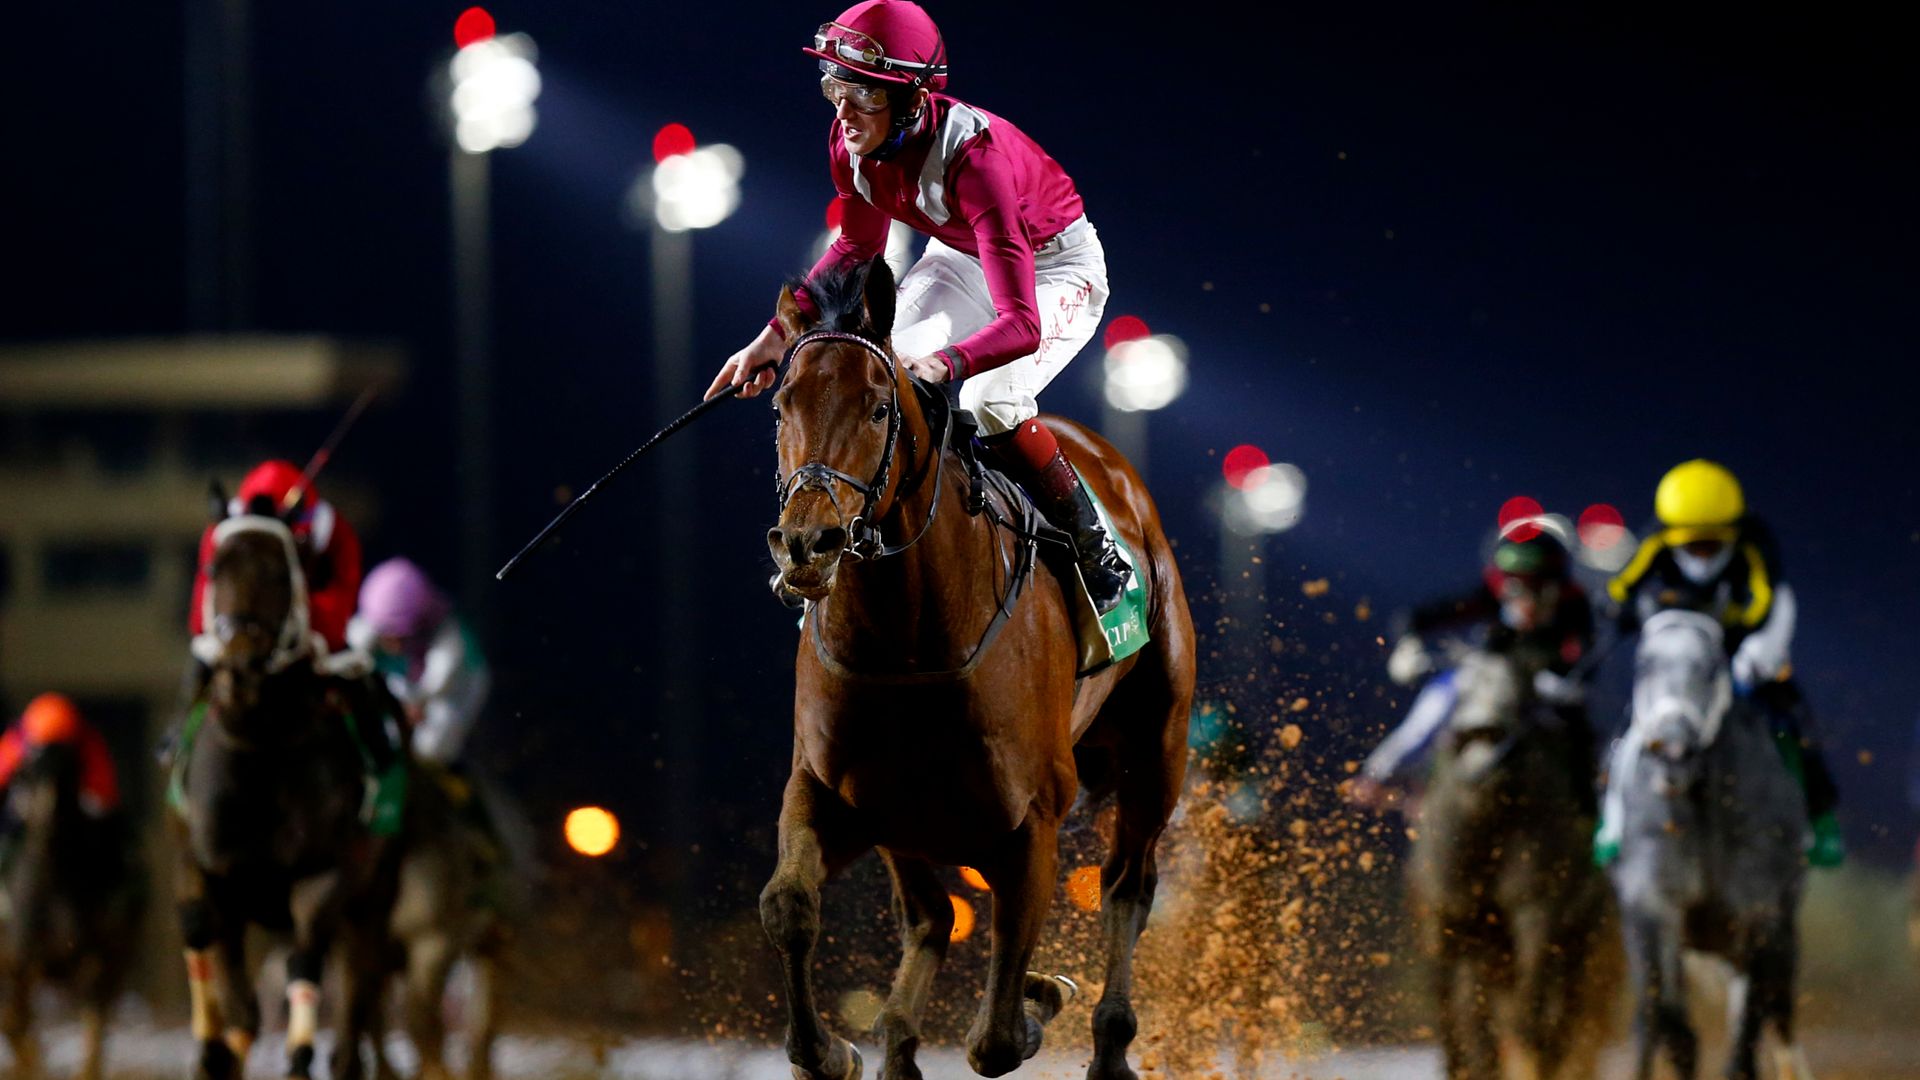 Breeders' Cup under consideration for retiring Mishriff